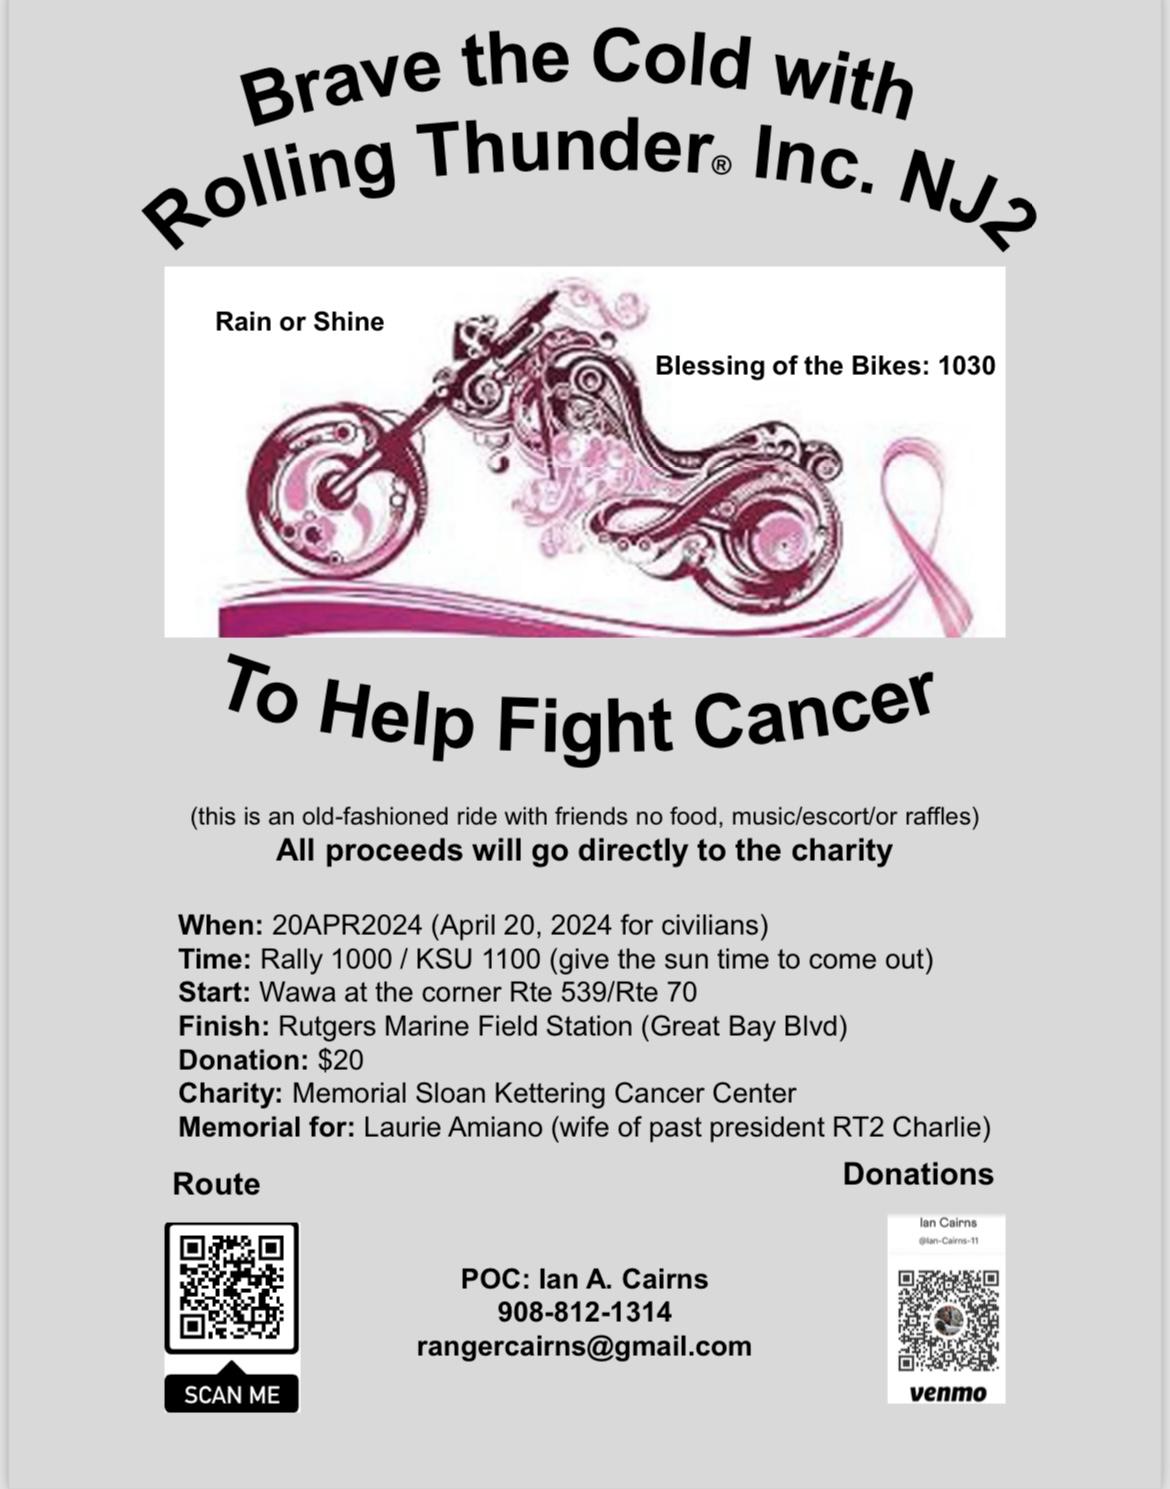 Brave the Cold with RTNJ2 to Fight Cancer